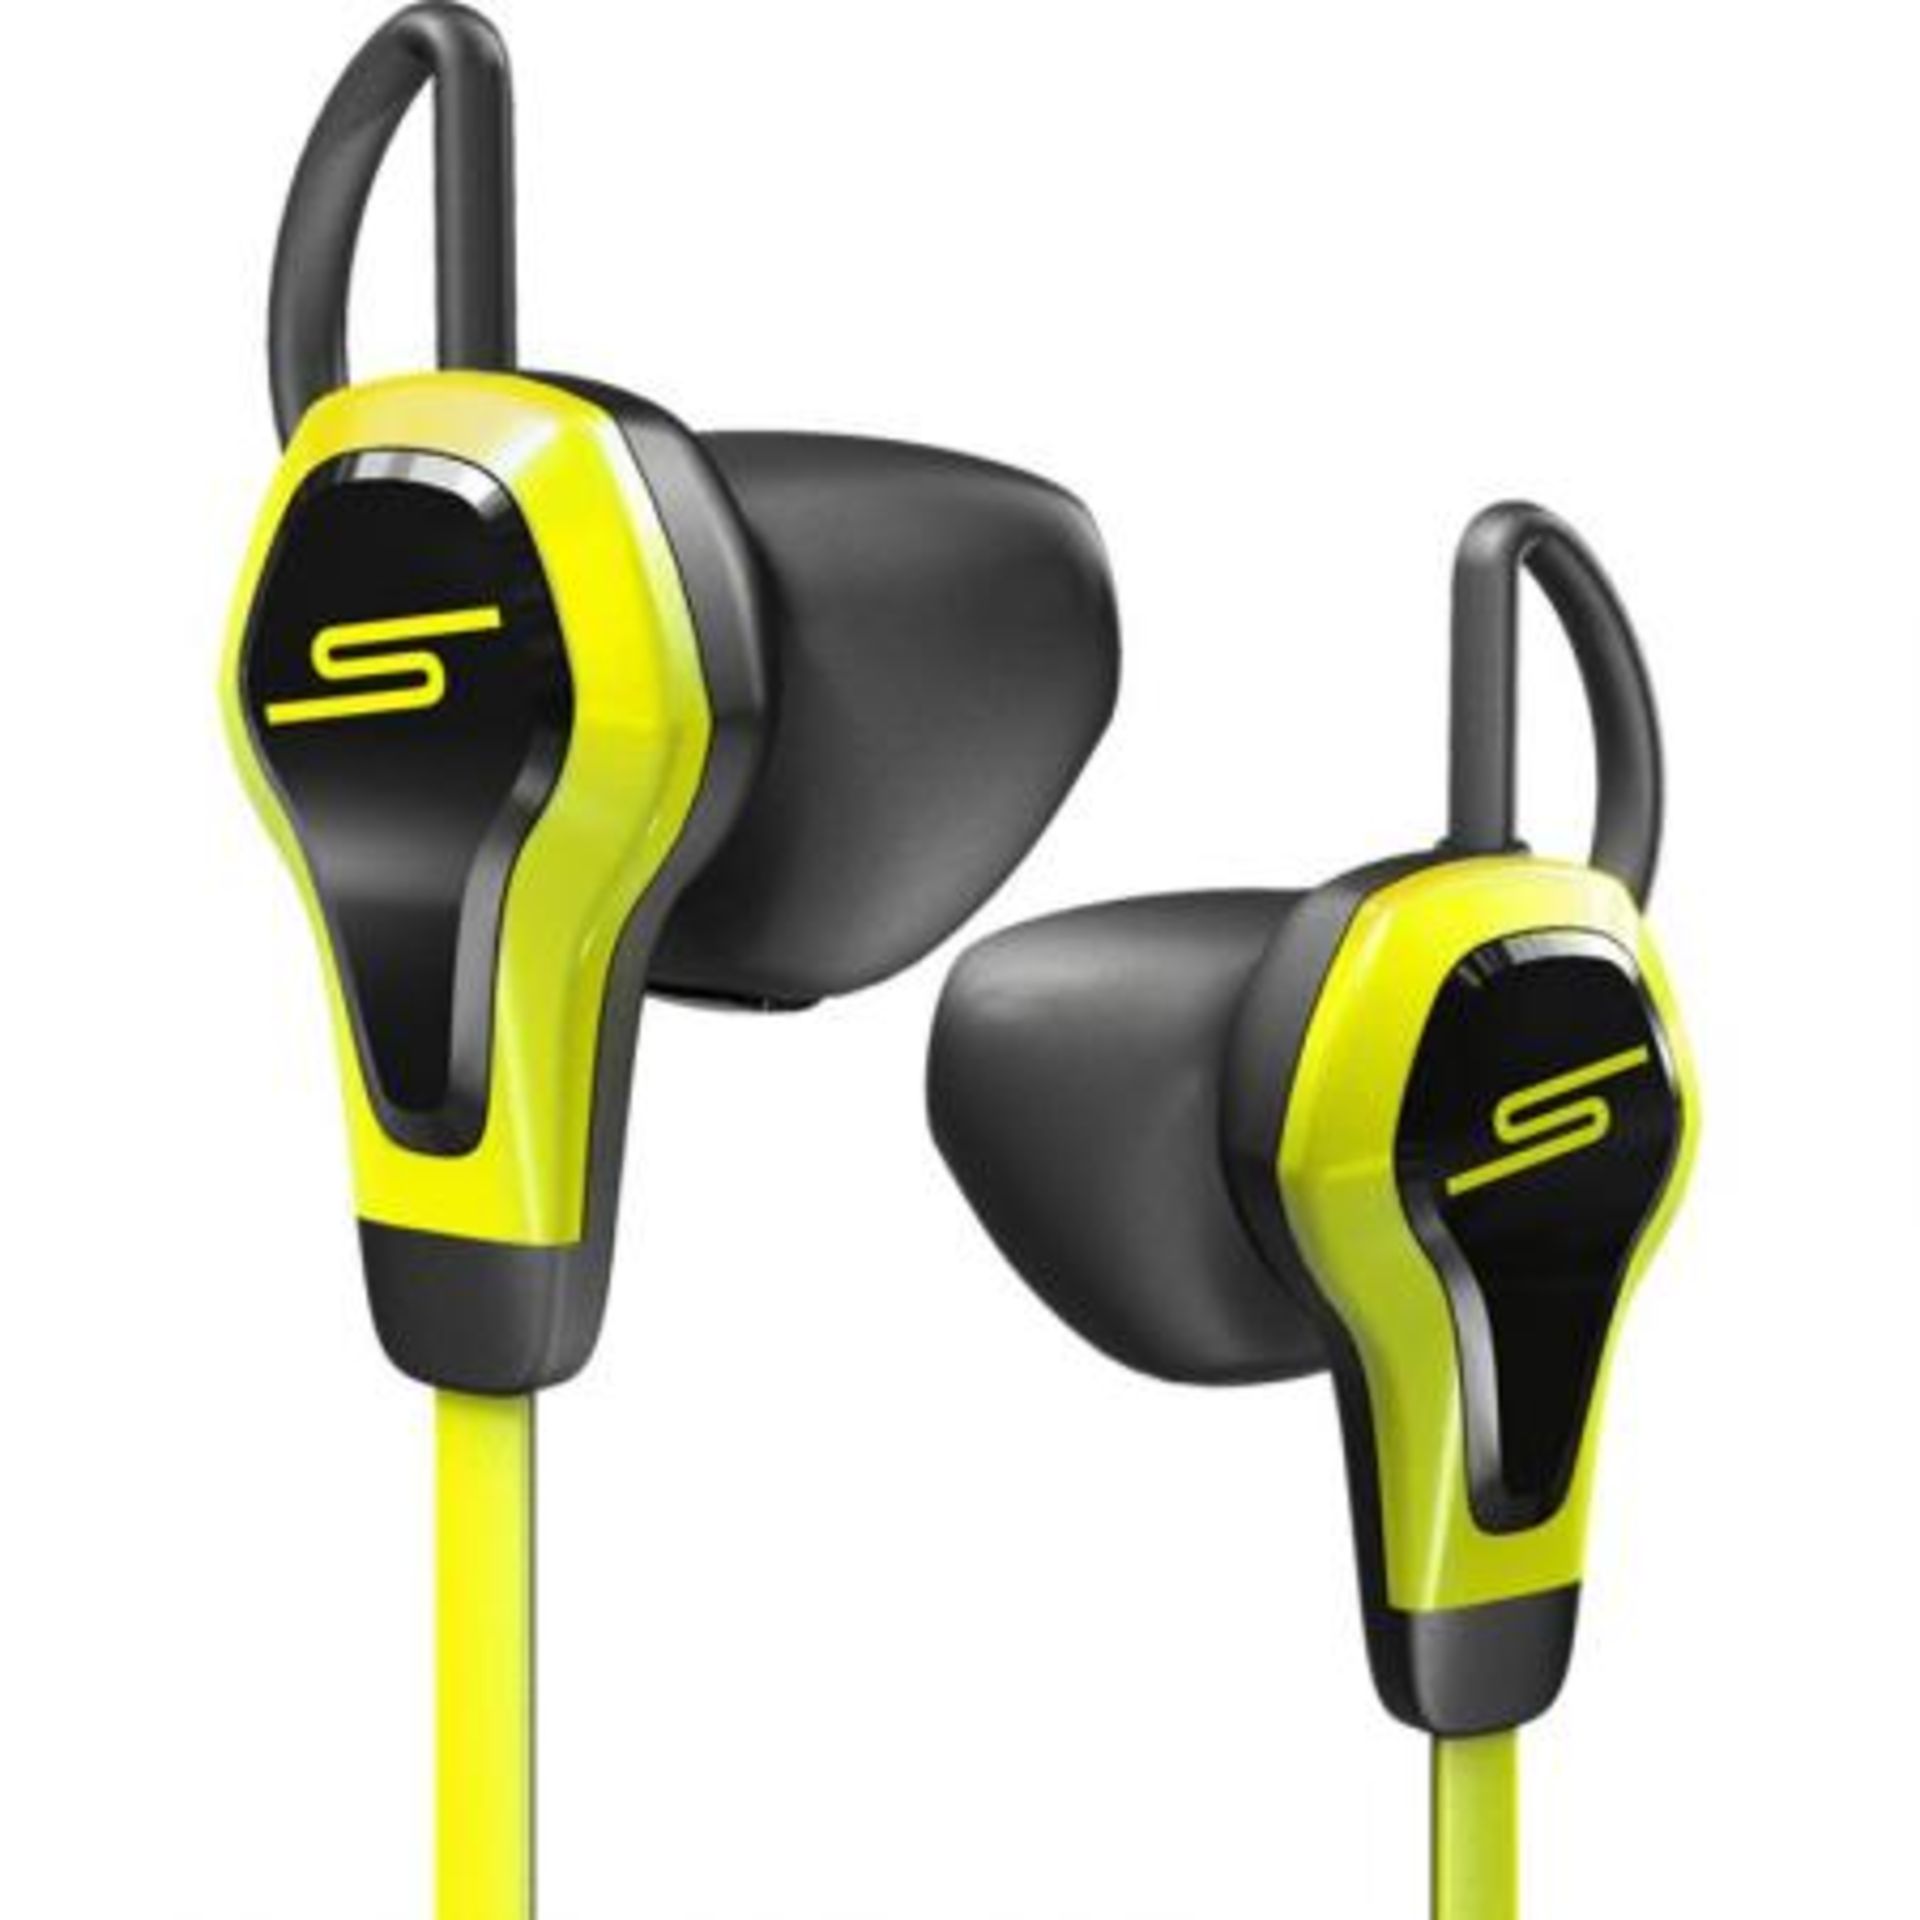 V Brand New SMS Audio BioSport Earphones - Heart Rate Monitor Measures Changes In Blood Flow - Smart - Image 2 of 5